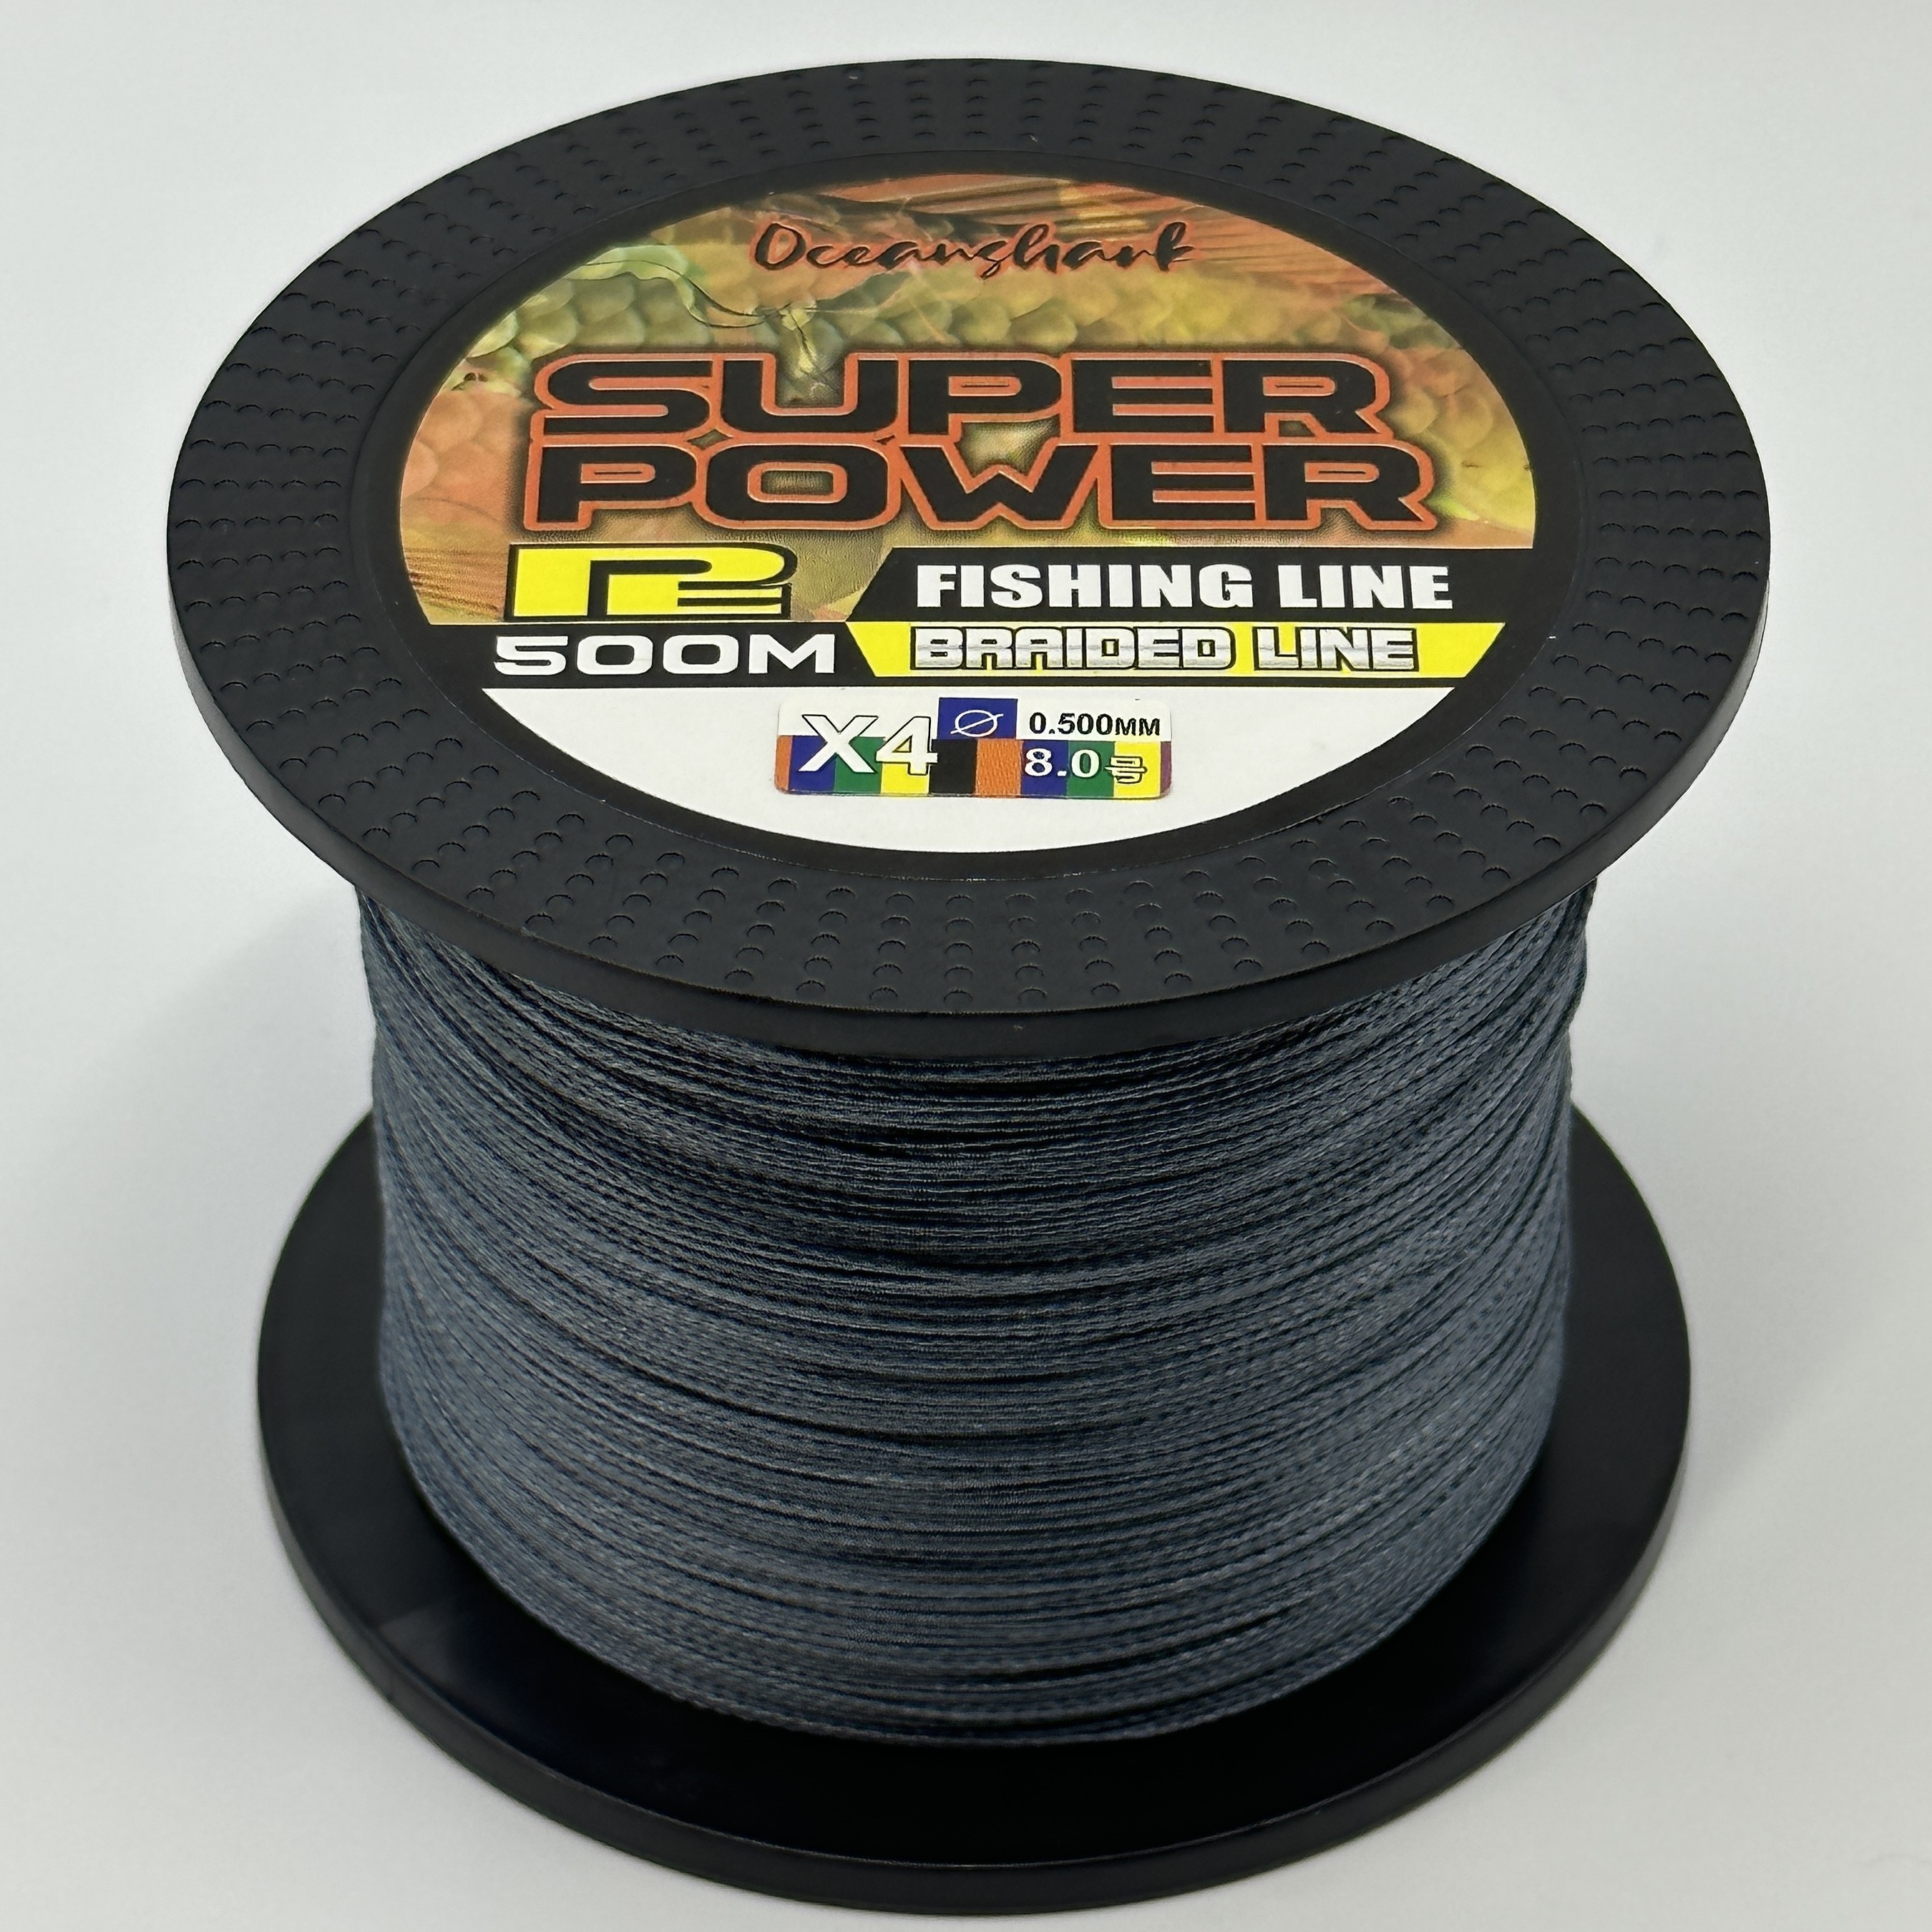 Super Strong Fishing Line - 500m/1640ft 4-Strand Multifilament PE  Anti-abrasion Braided Line for Smooth Long Casting, Available in 10-80 LB  Options